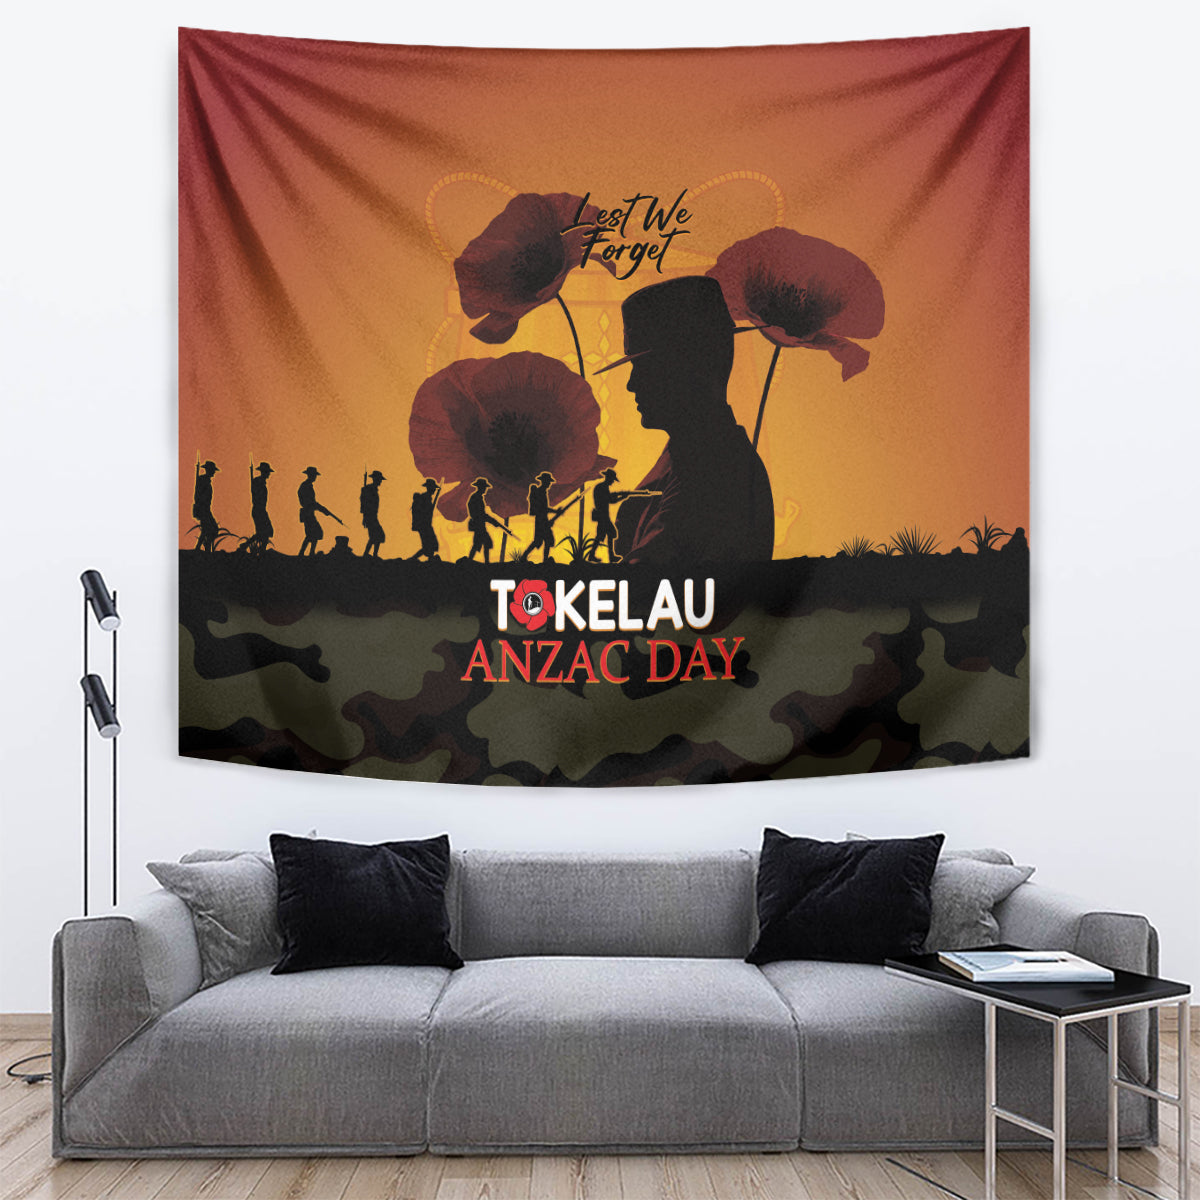 Tokelau ANZAC Day Tapestry Camouflage With Poppies Lest We Forget LT14 Yellow - Polynesian Pride